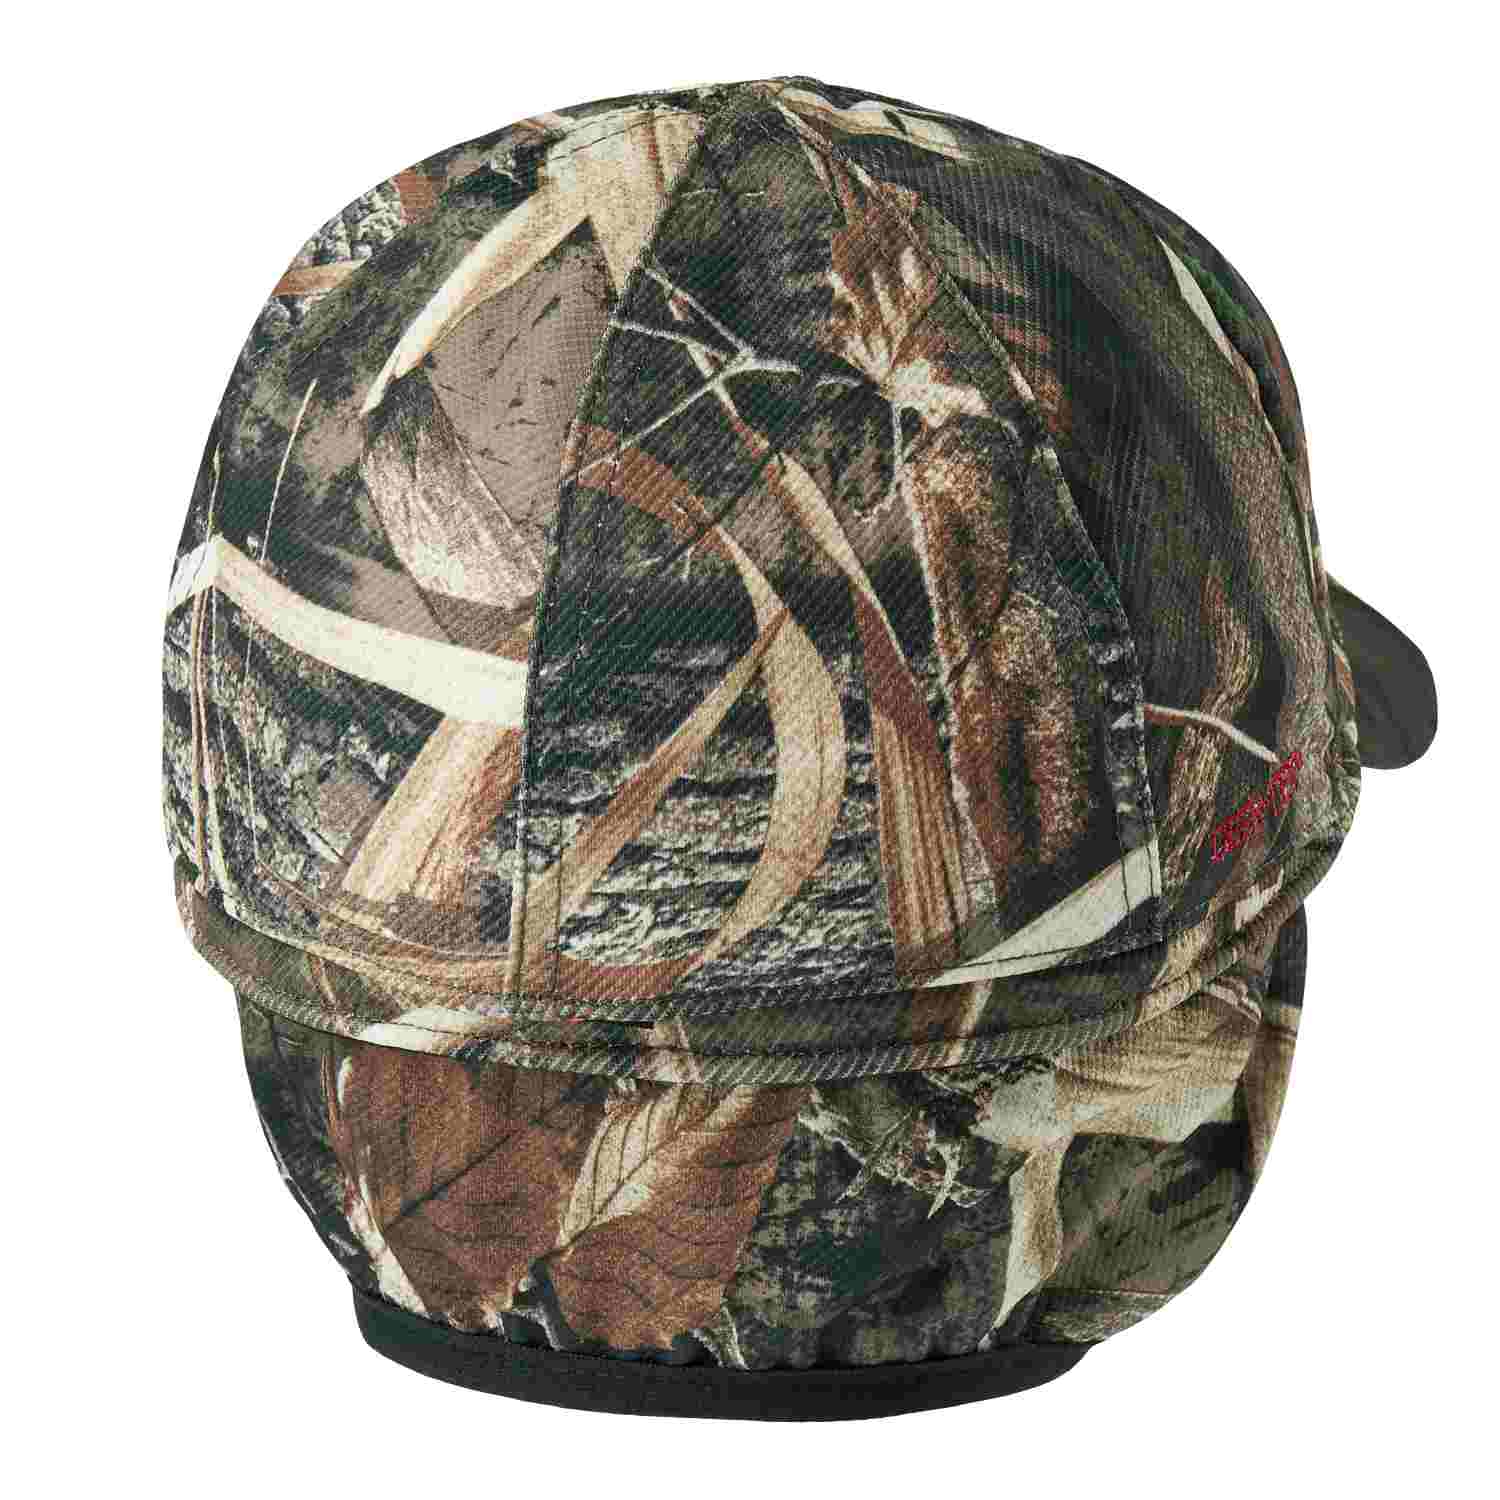 Deerhunter Muflon Cap with Safety - Hollands Country Clothing 